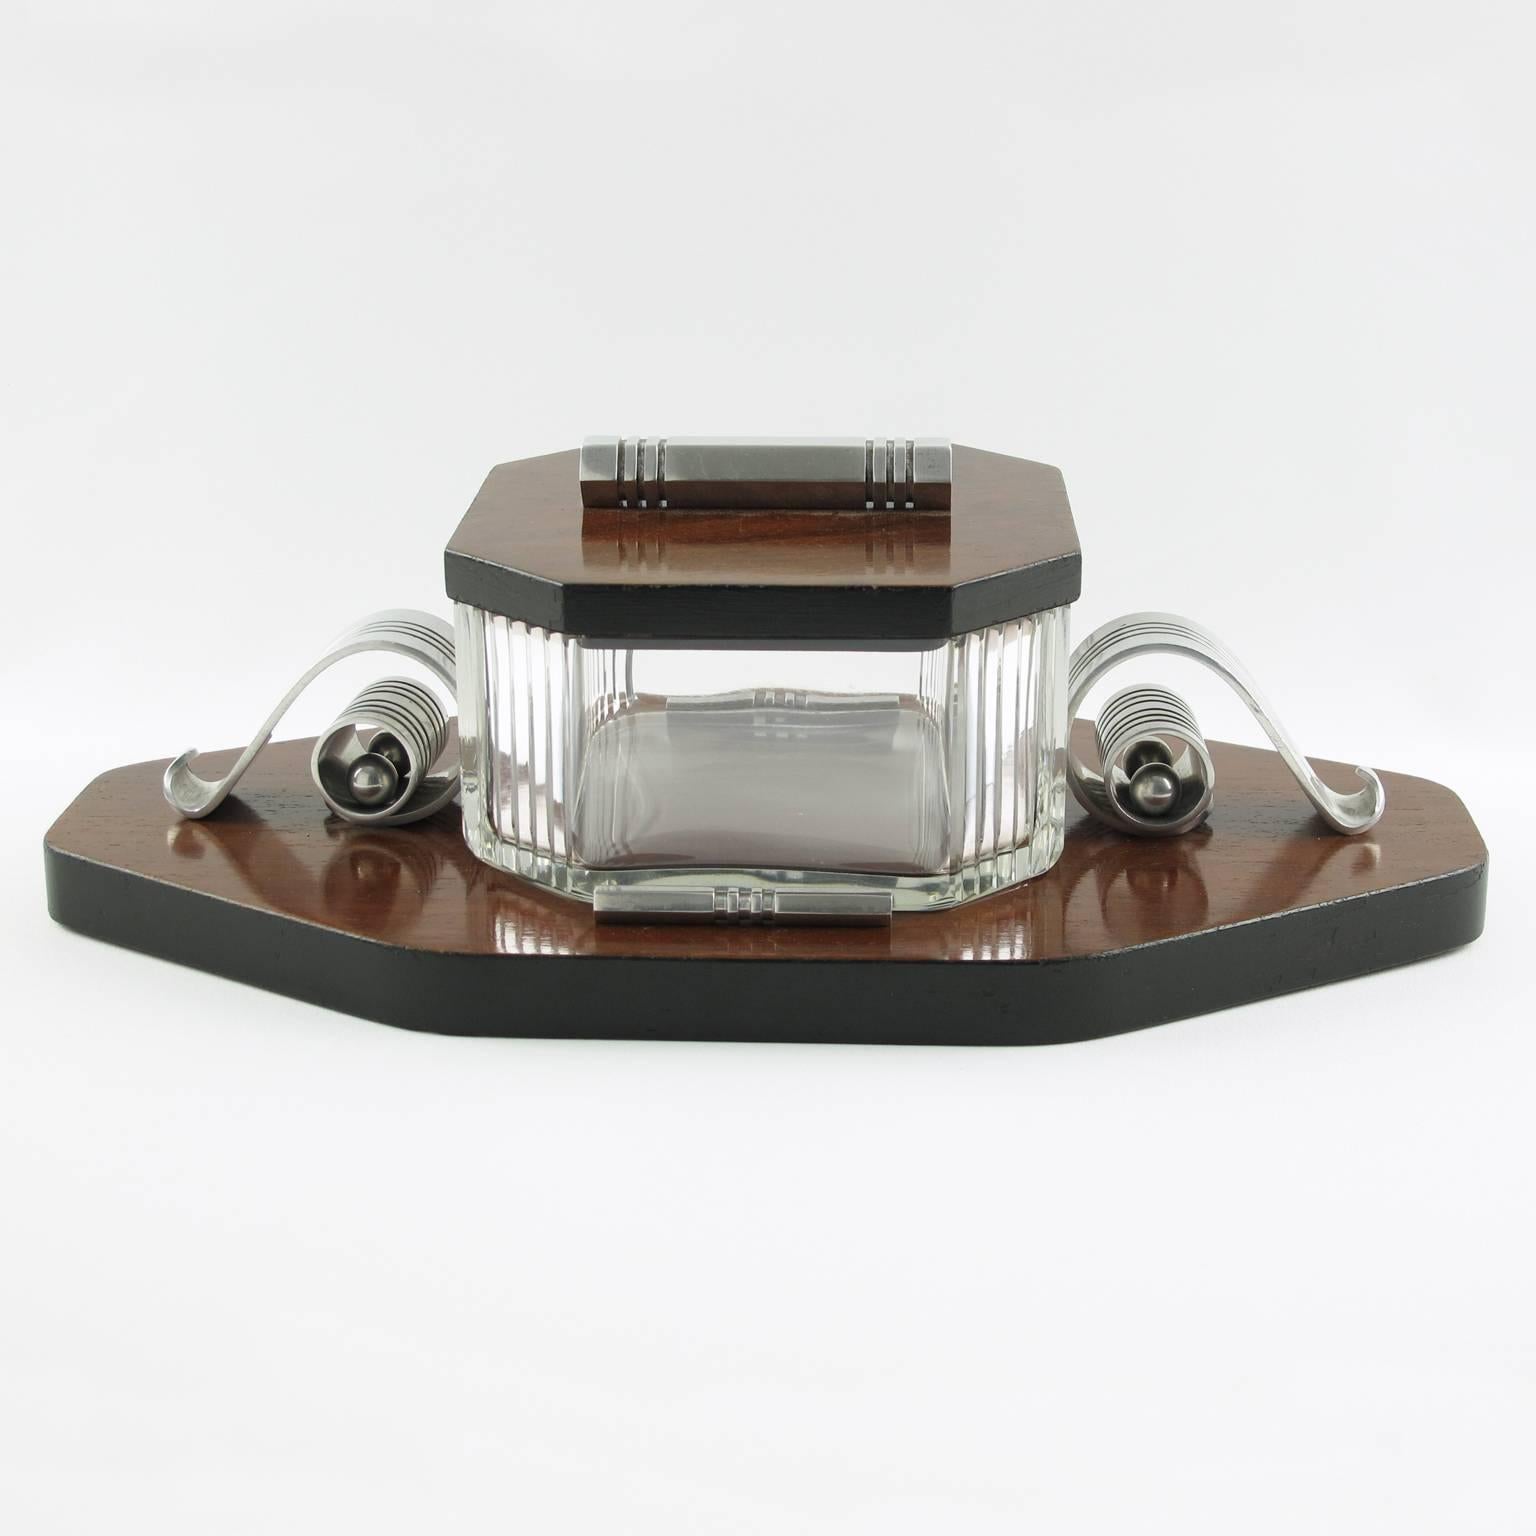 French Art Deco modernist cookie or candy serving jar or large decorative box by Louis Prodhon. Beautiful rosewood veneer with black edging serving tray base with polished cast aluminum accents. Heavy handmade cut crystal liner, very thick, with